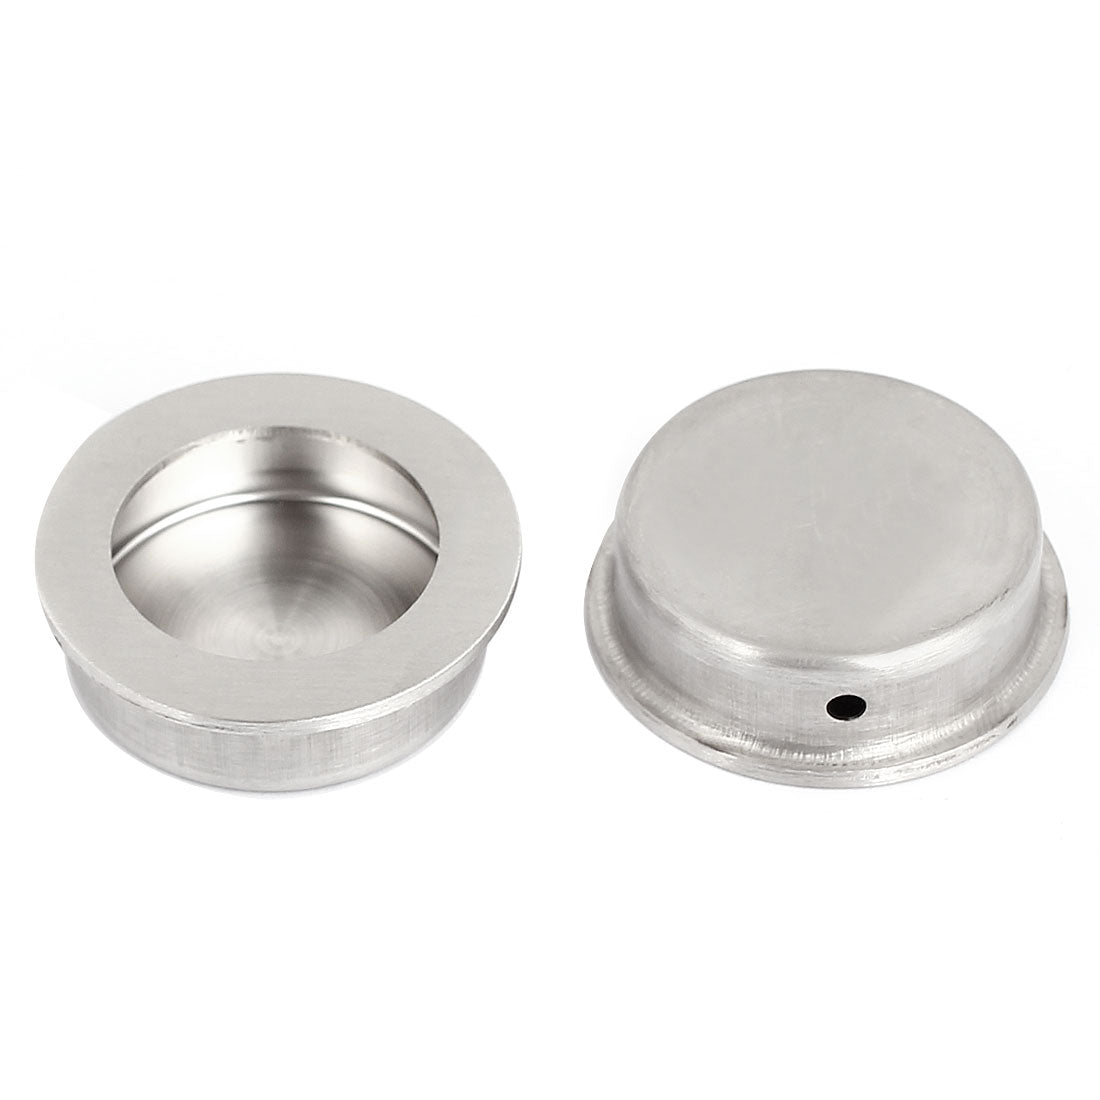 uxcell Uxcell Sliding Door Drawer Stainless Steel 40mm Round Recessed Flush Pull Handle 2pcs